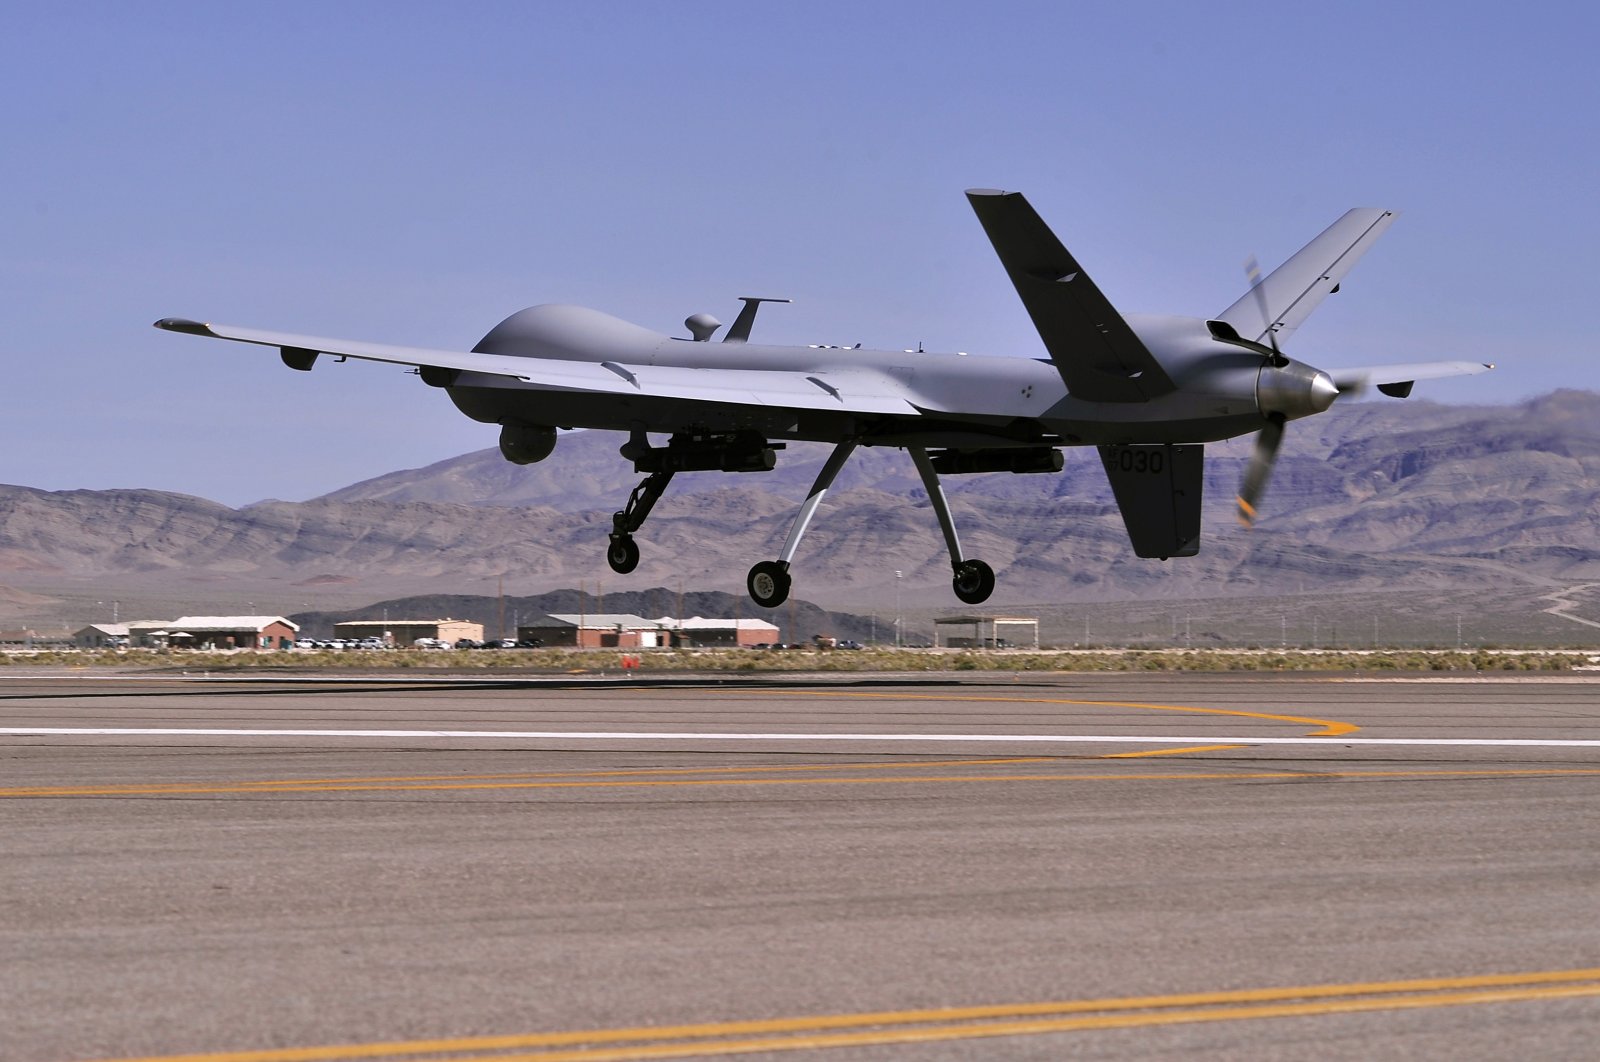 A handout photo made available by the U.S. Air Force of an MQ-9 Reaper remotely piloted aircraft taking off on a training mission at Creech Air Force Base, May 13, 2013 (issued 14 March 2023). (EPA File Photo)